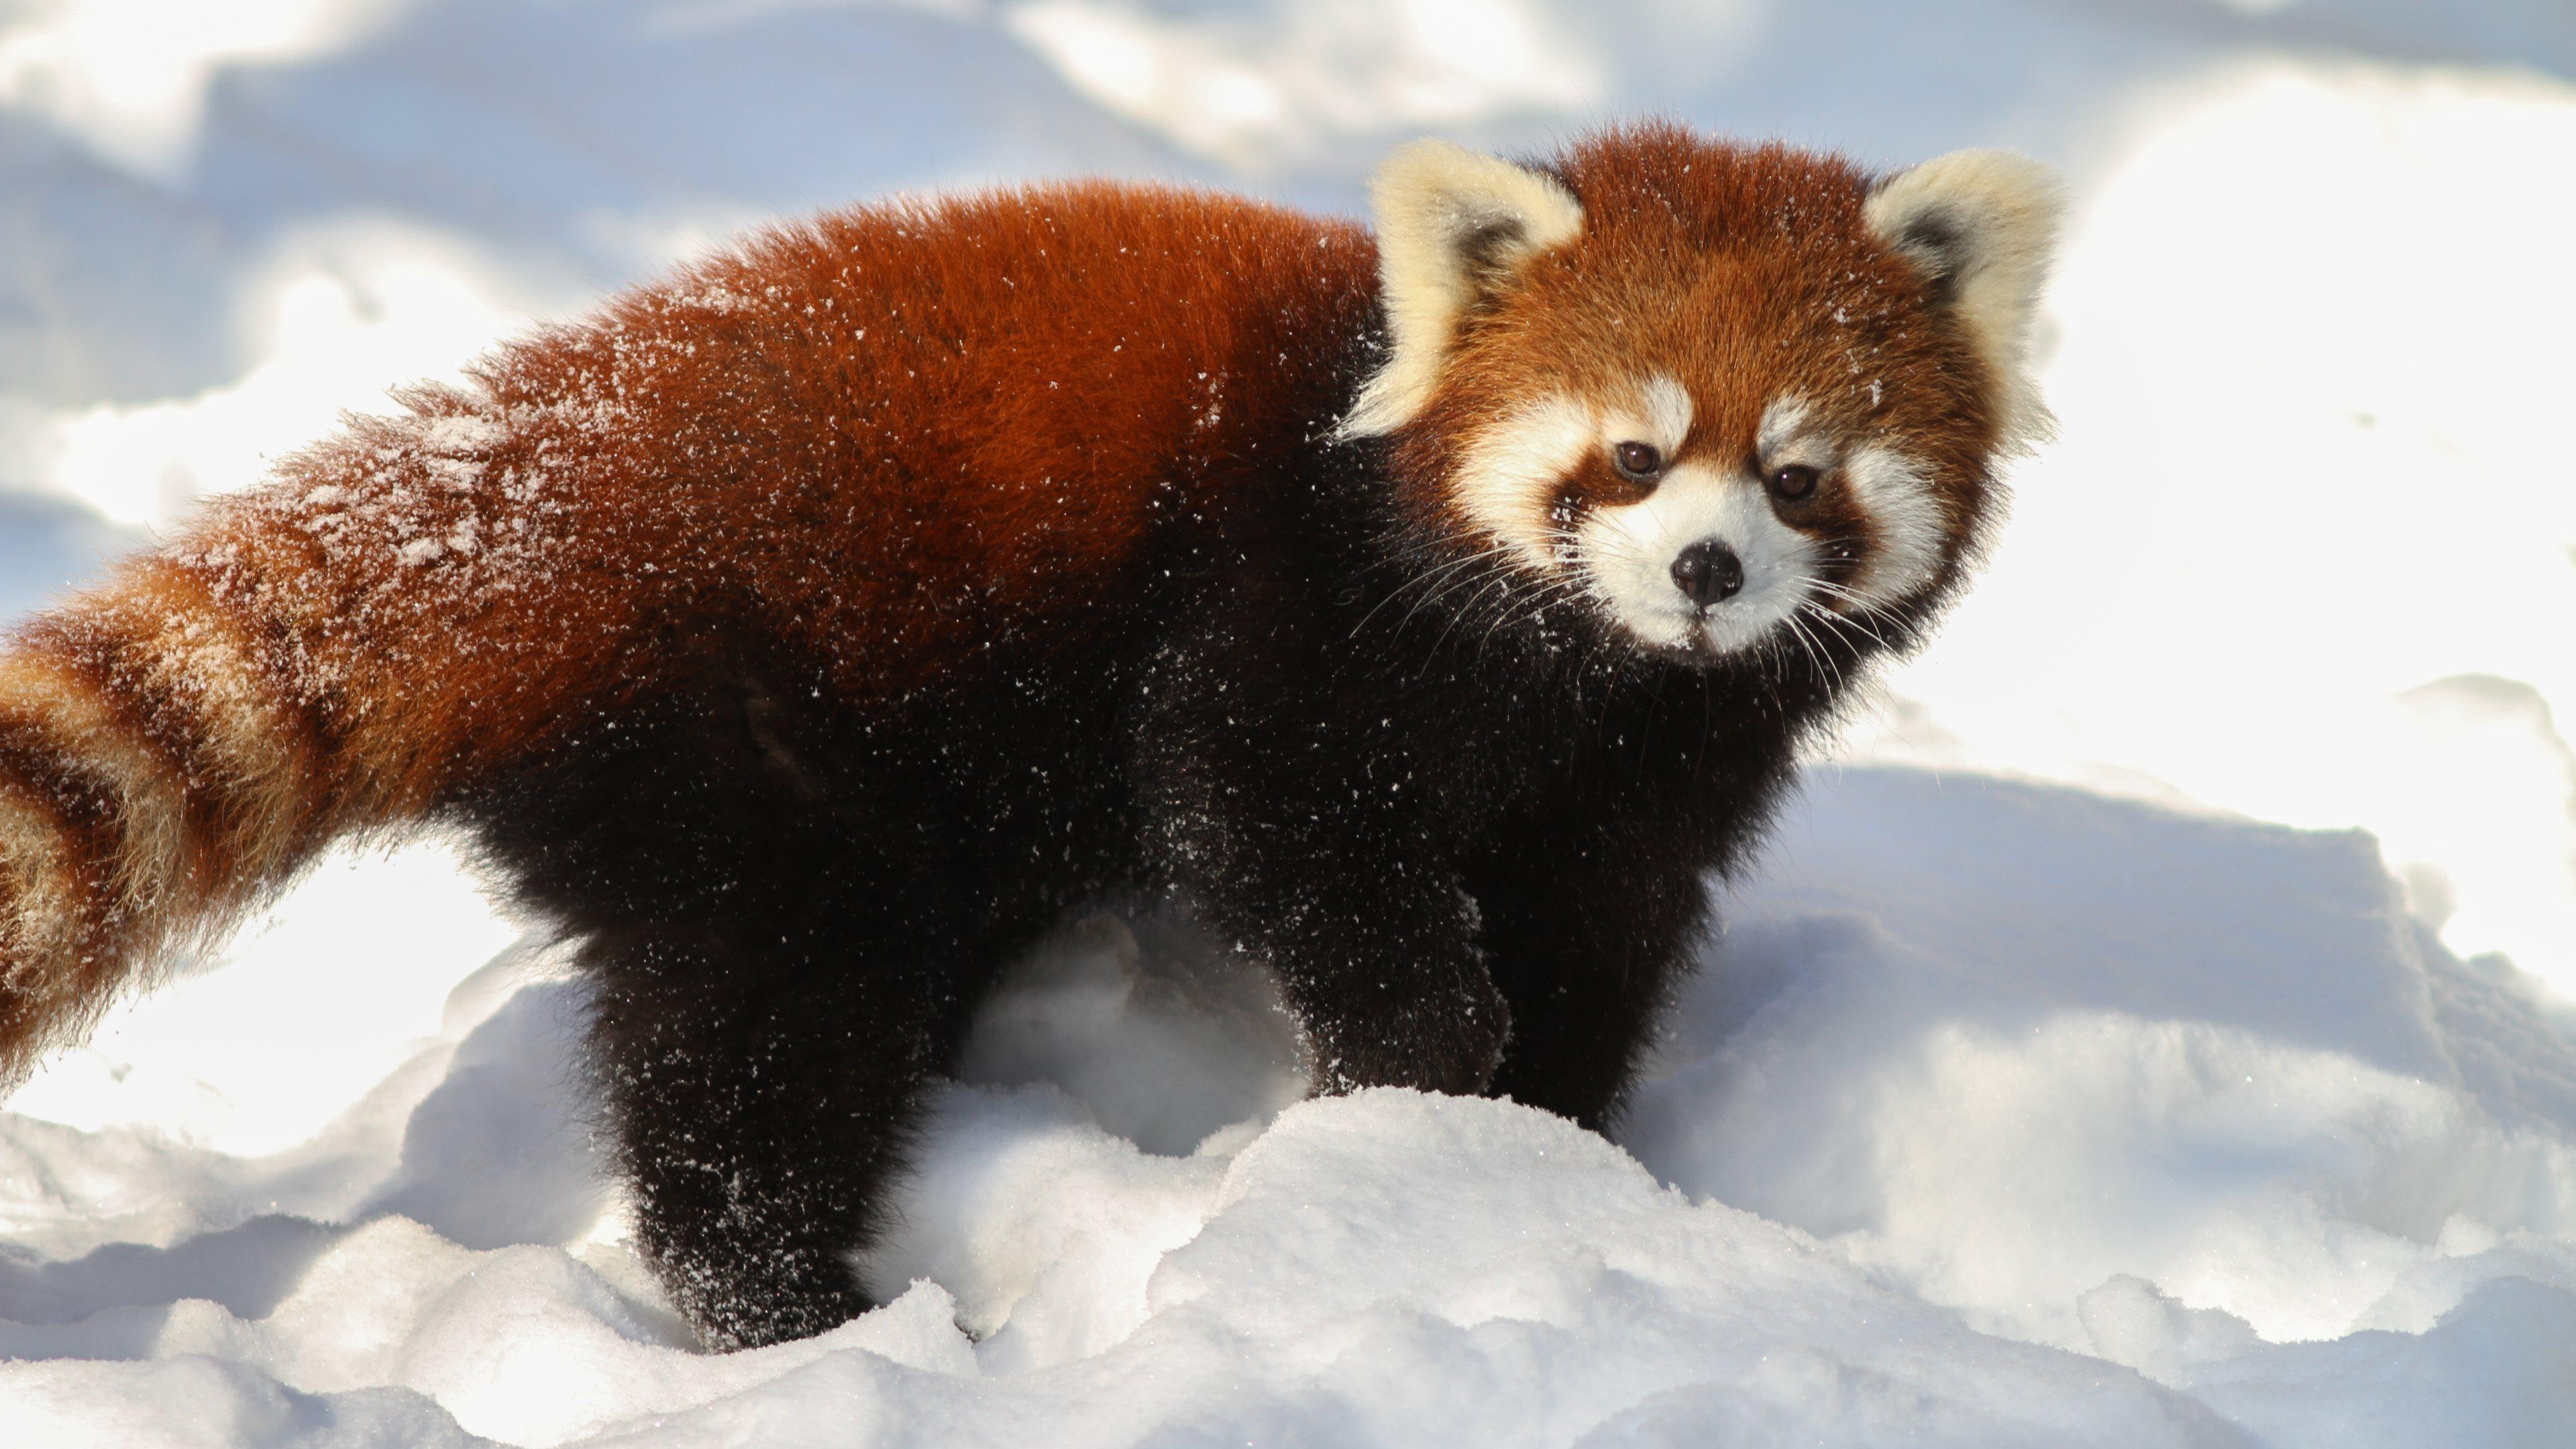 Red Panda Science. For my kind, courageous and capable